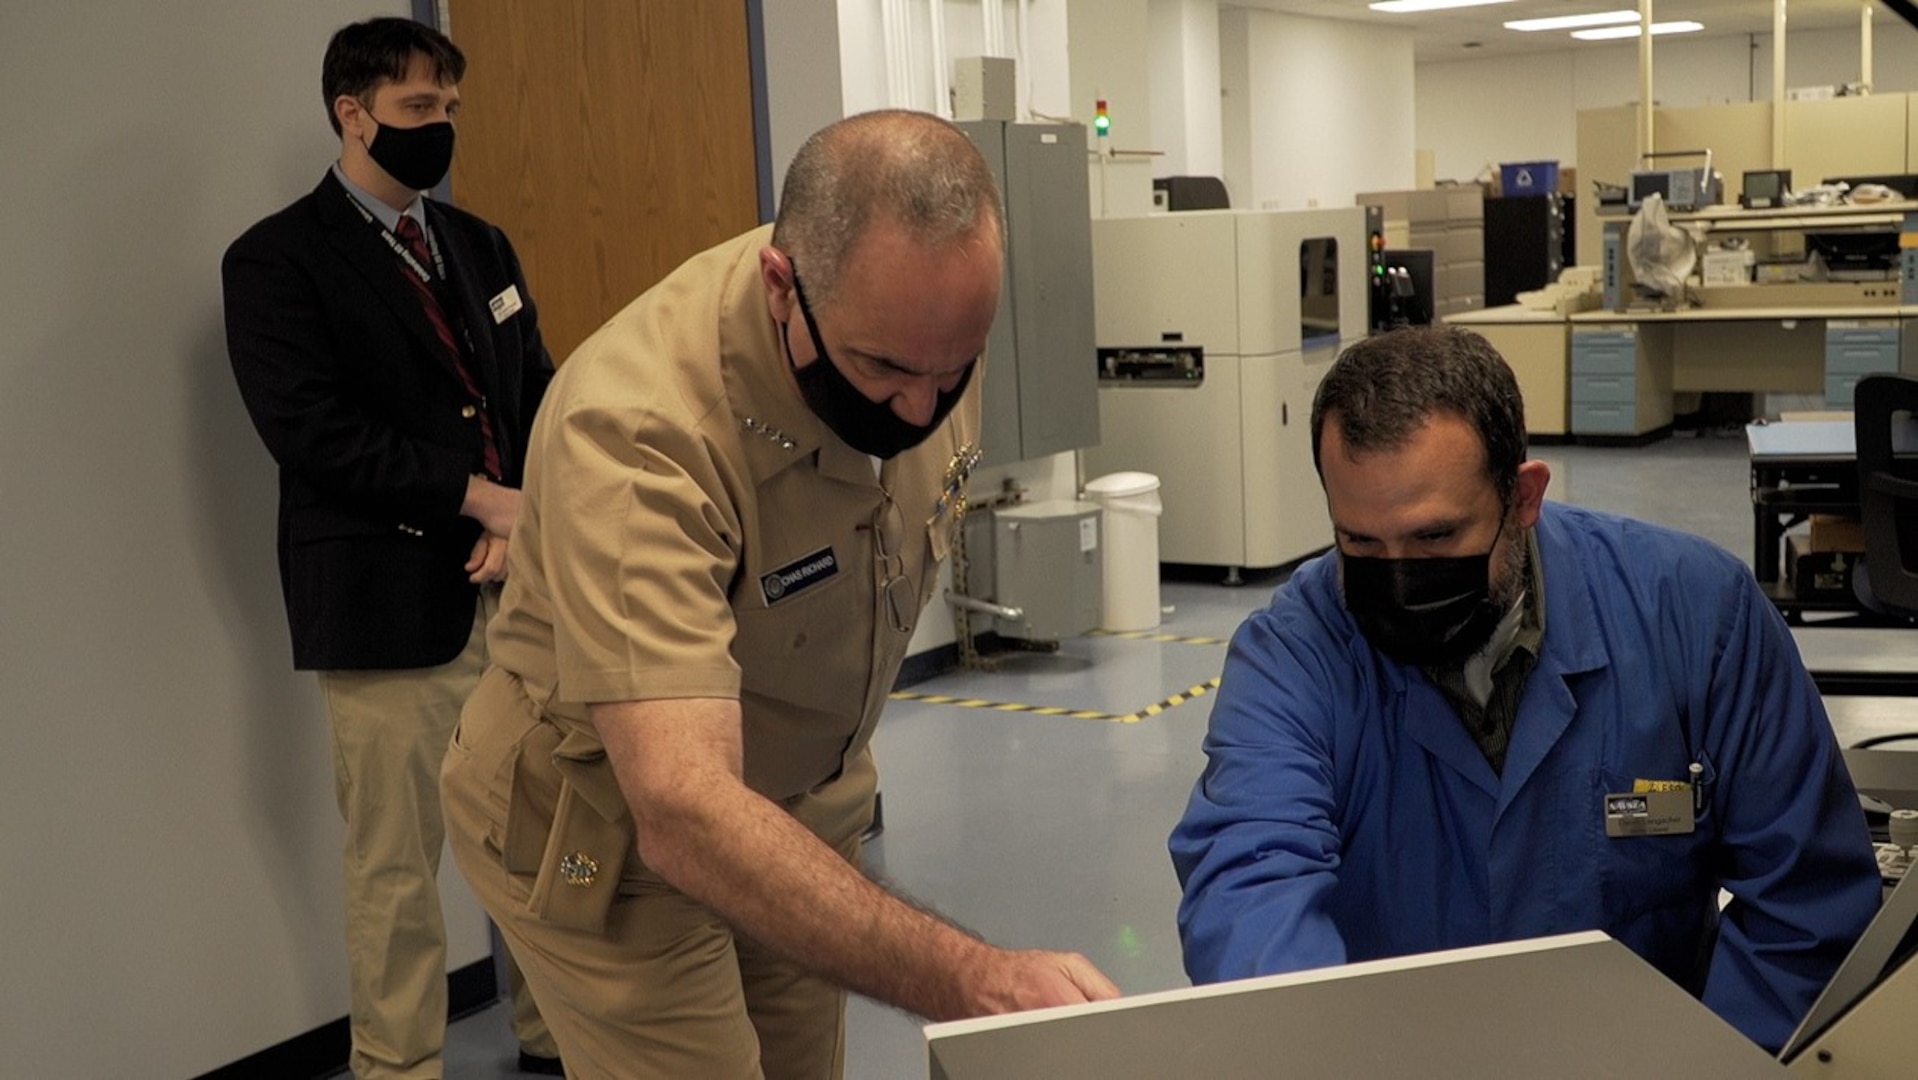 A Crane employee speaks with Strategic Command’s senior leader Adm. Charles Richard in a lab.